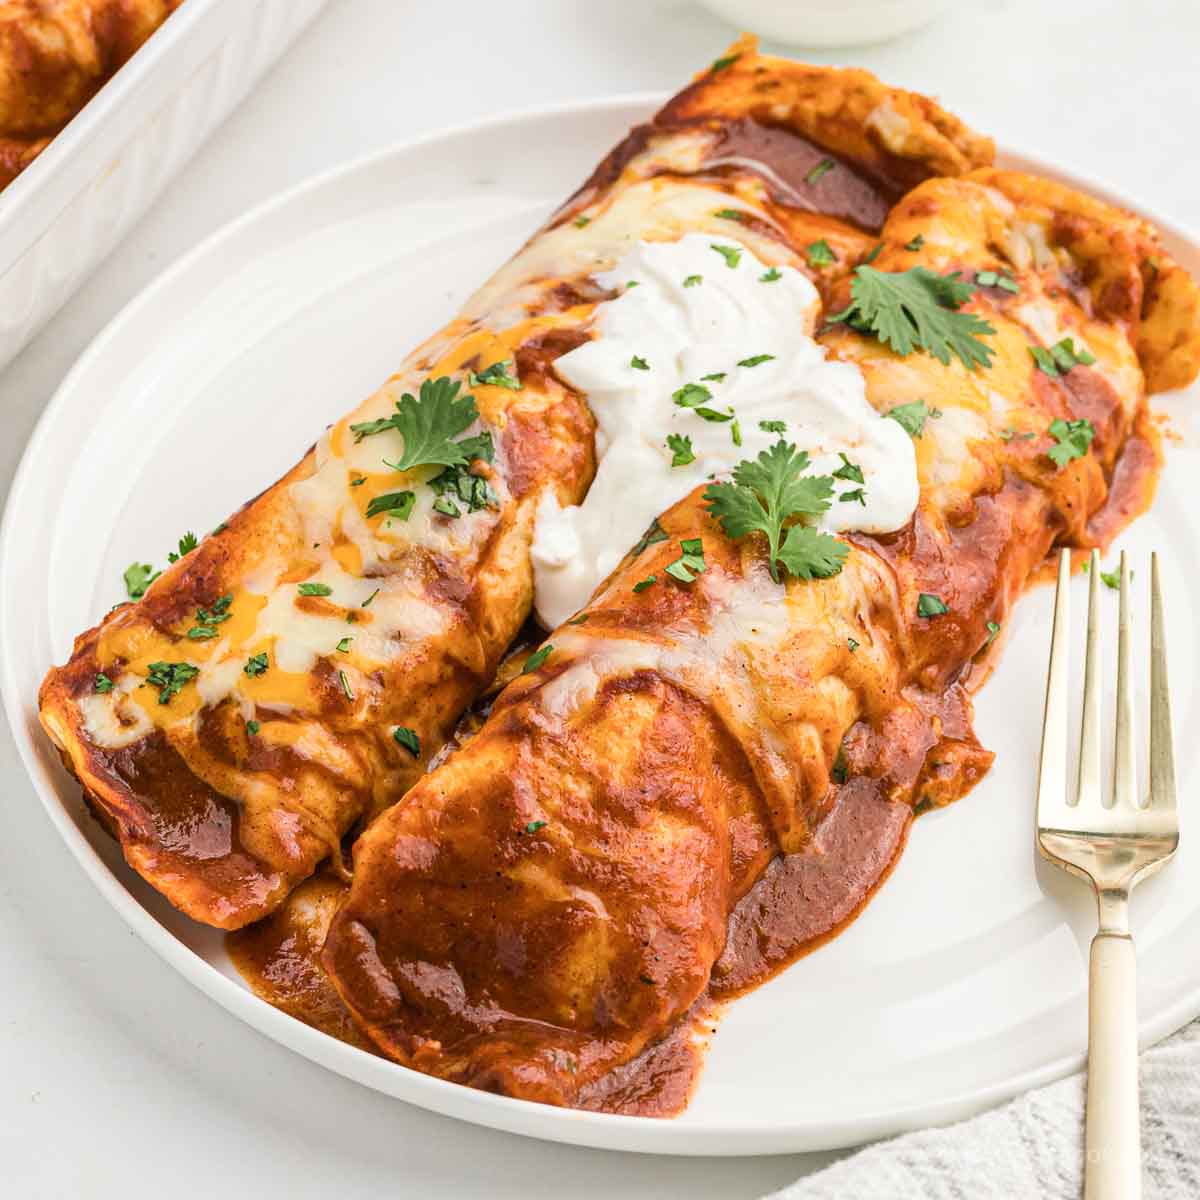 Plate of two chicken enchiladas in red sauce.